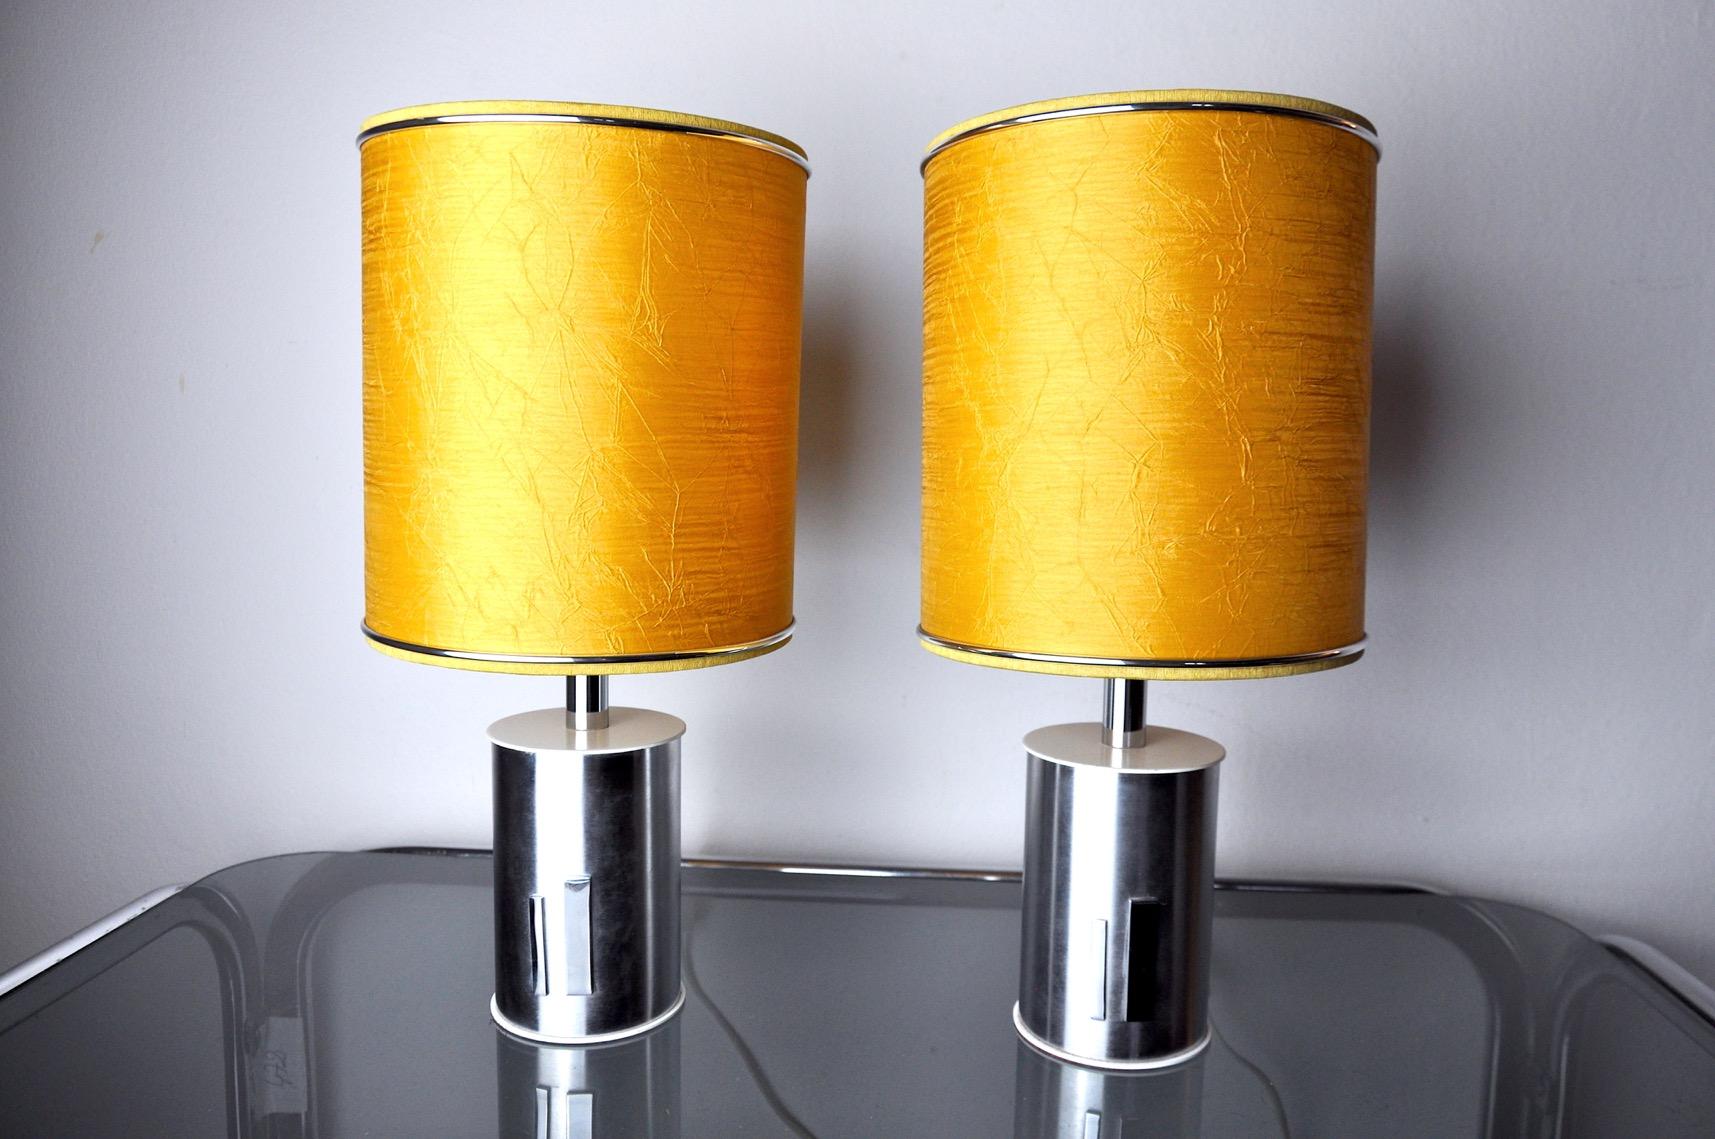 Hollywood Regency Pair of futuristic lamps by Marca SL, Spain, 1970s For Sale